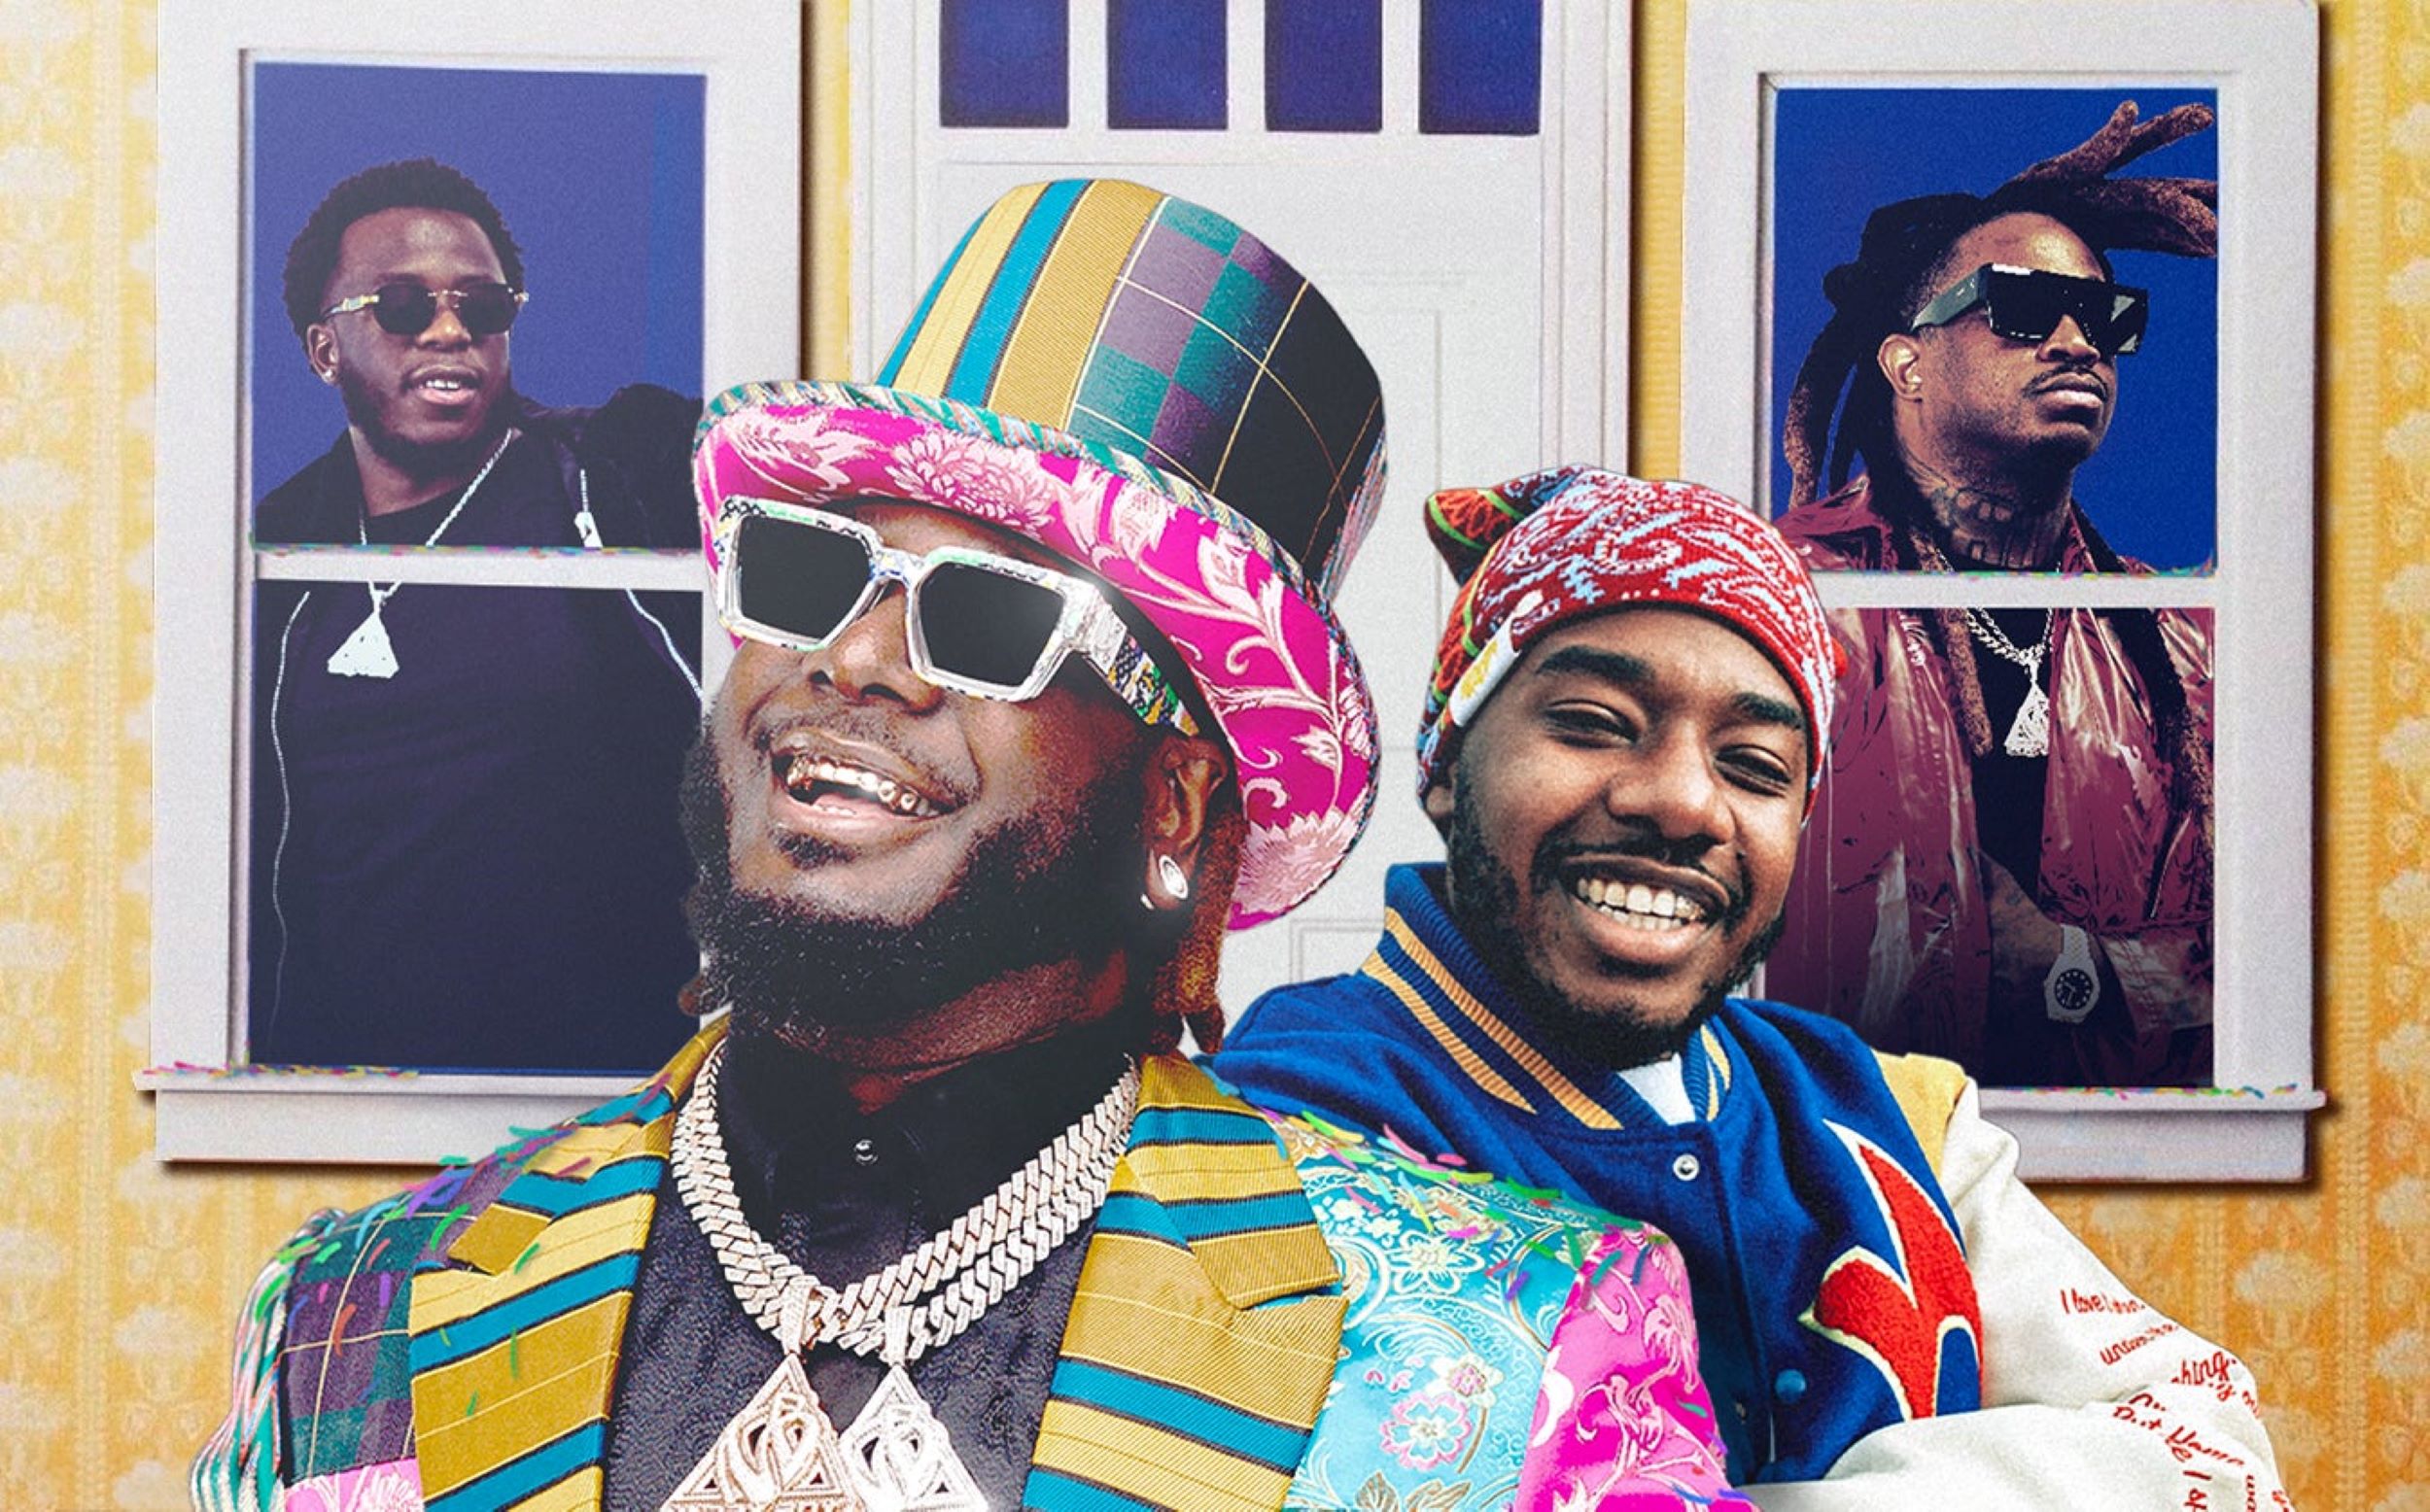 T-Pain smiles and poses in glasses and colorful clothing with a matching hat. 